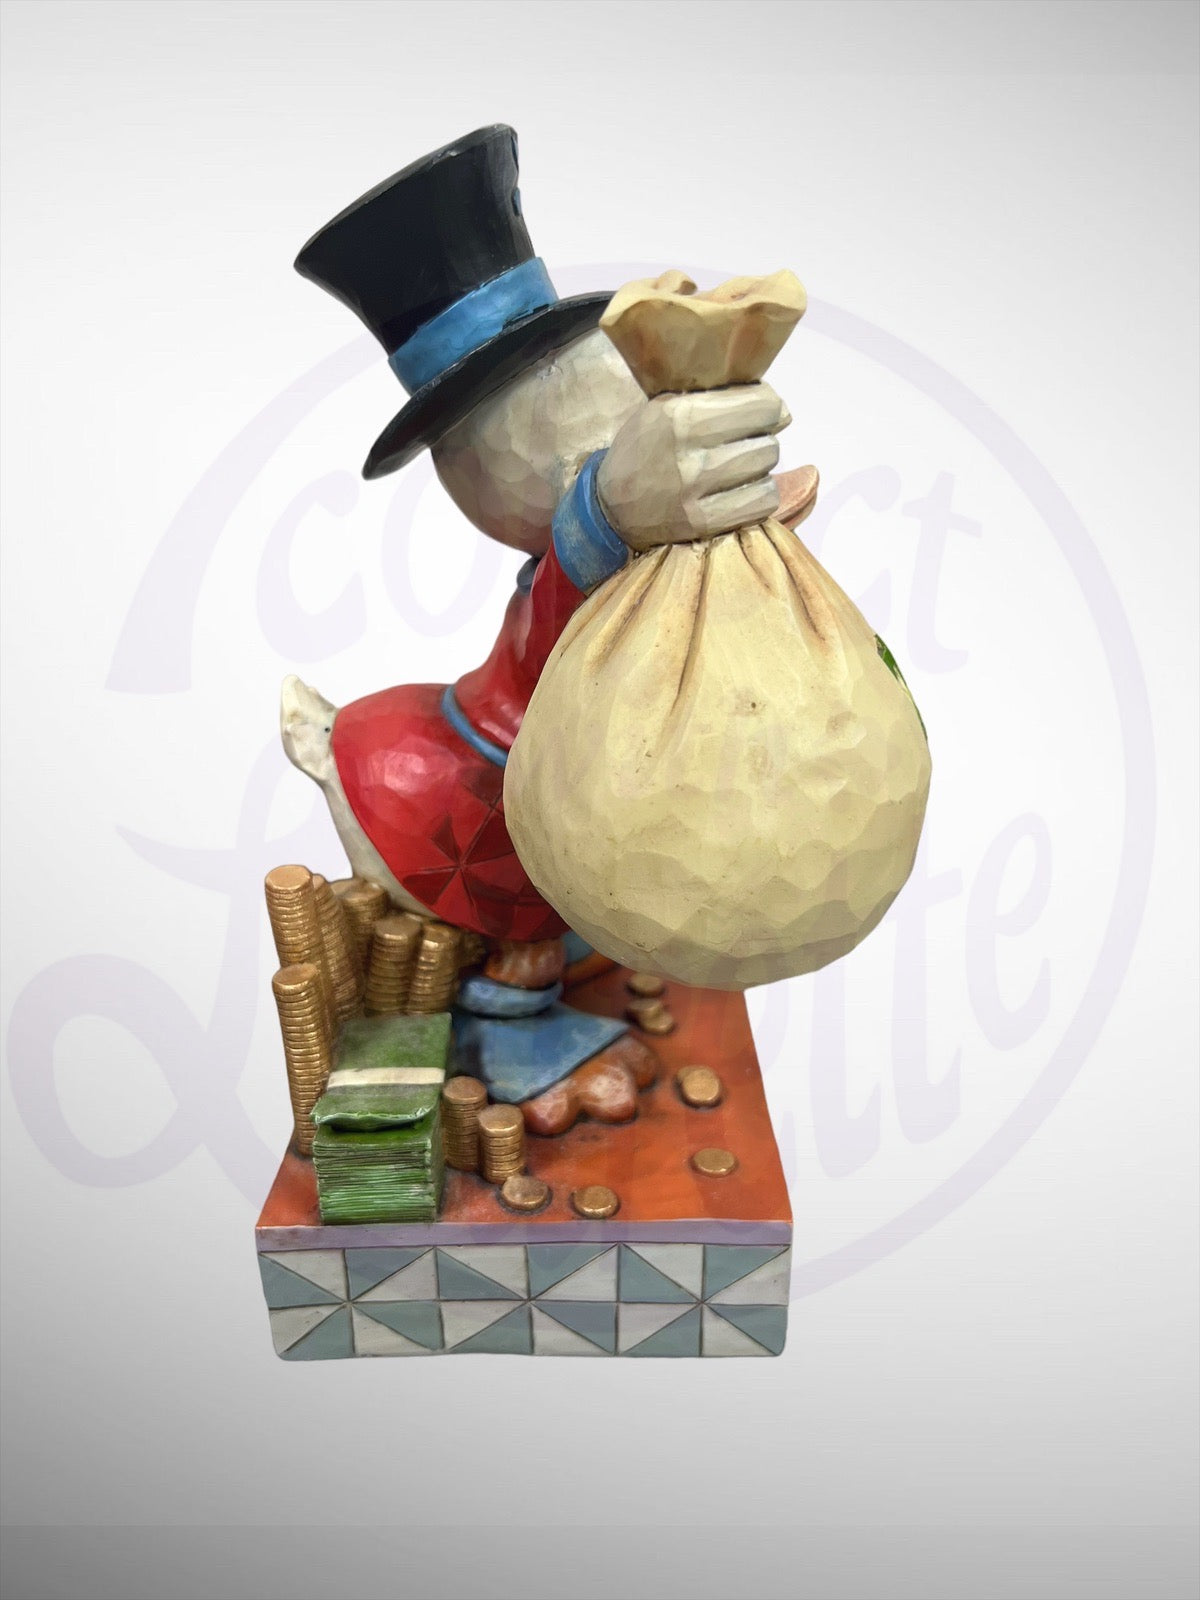 Jim Shore Disney Traditions - Wealth of Riches Scrooge McDuck Figurine DuckTales (No Box)